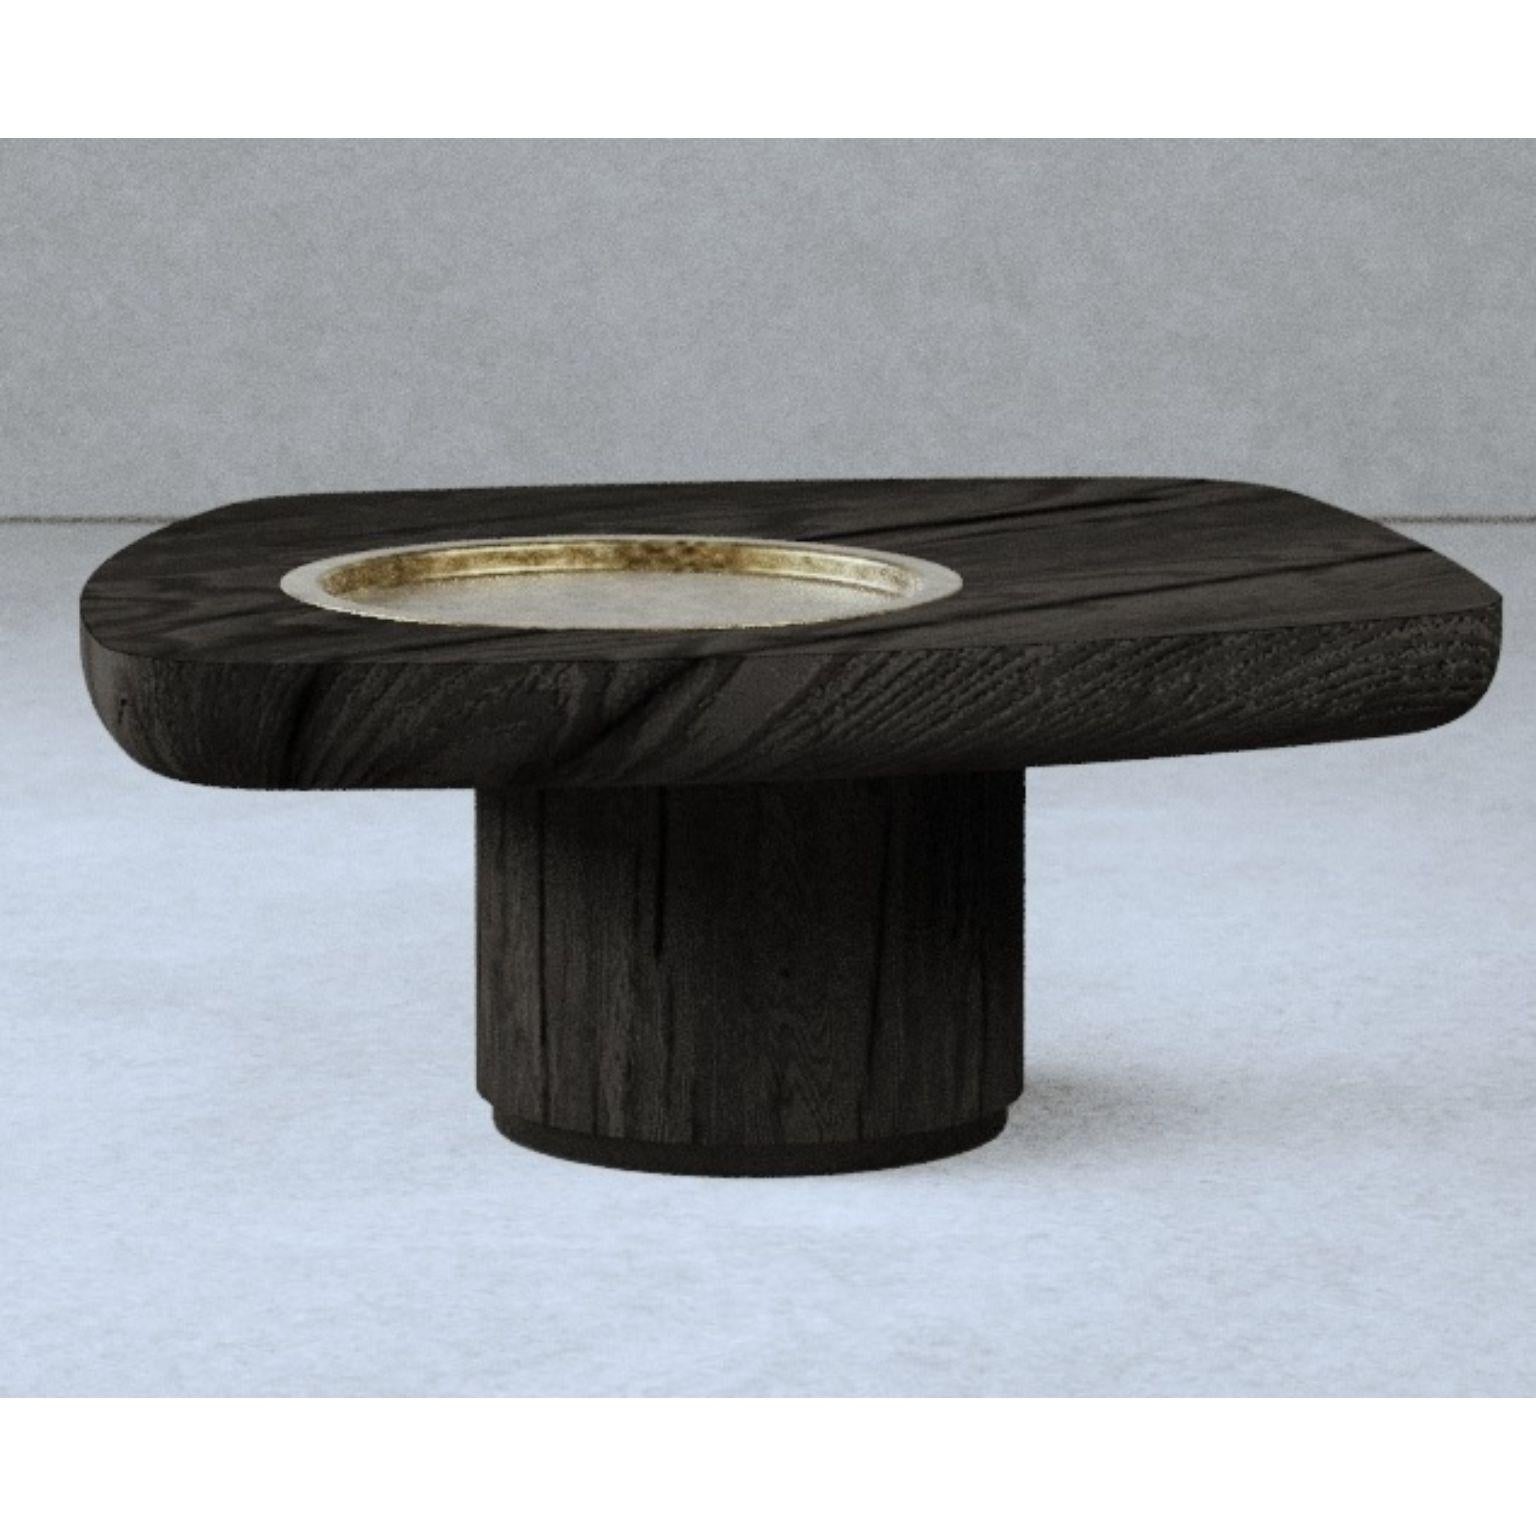 Mid Blackbird Wood Coffee Table by Gio Pagani
Dimensions: D 77 x W 83 x H 36 cm.
Materials: Fir wood and raw brass metal tray.

Also available in Superwhite marble. Please contact us.

In a fluid society capable of mixing infinite social and